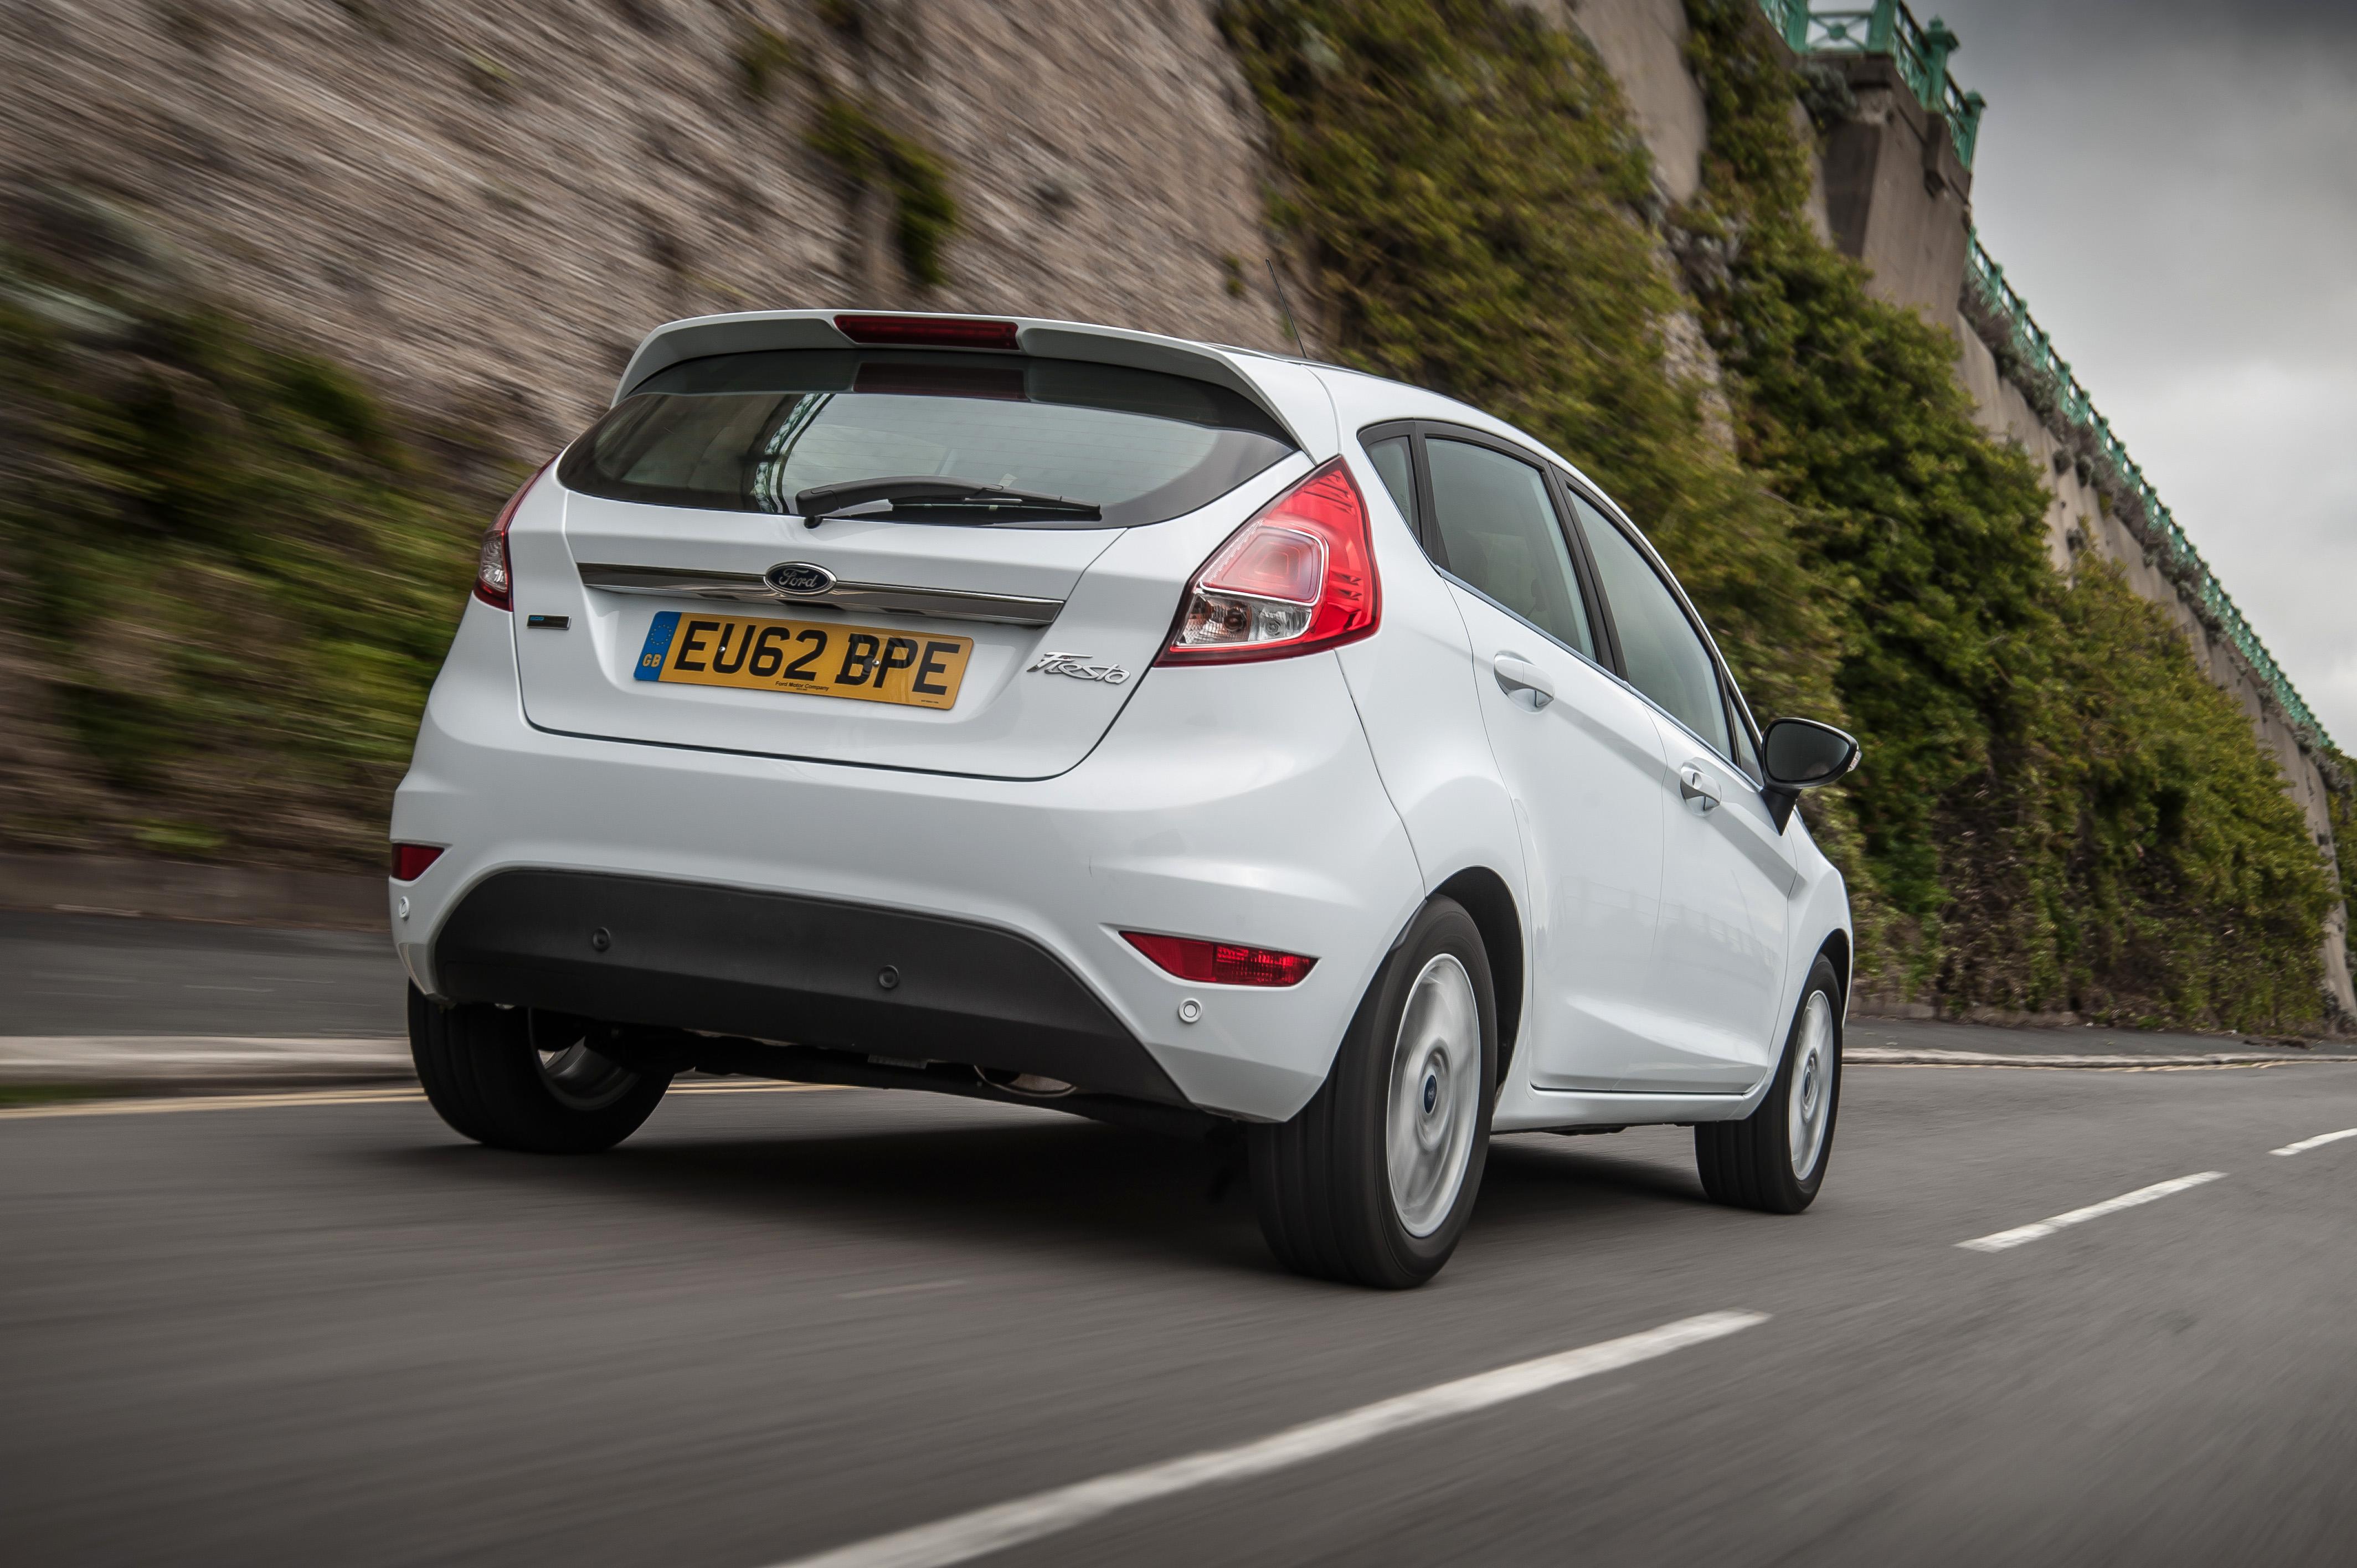 New ford fiesta video review #8